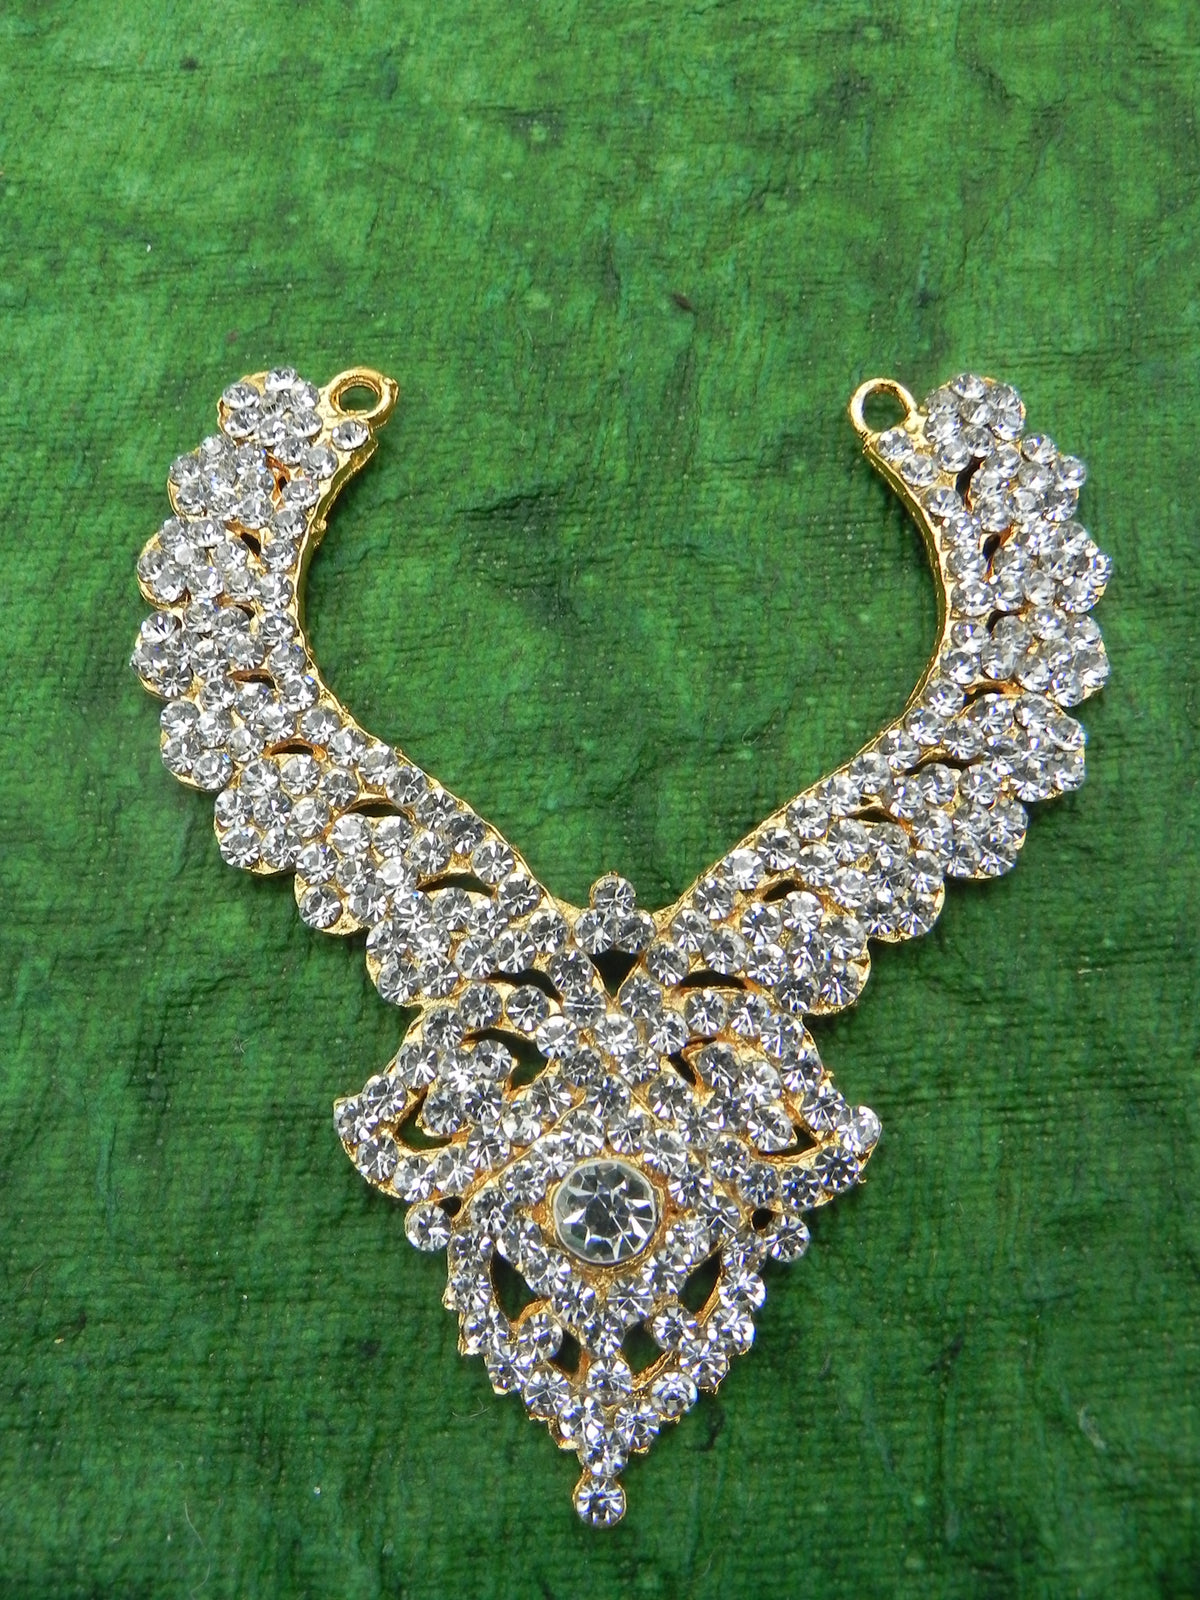 Small Necklace [Height - 3.5 inch]